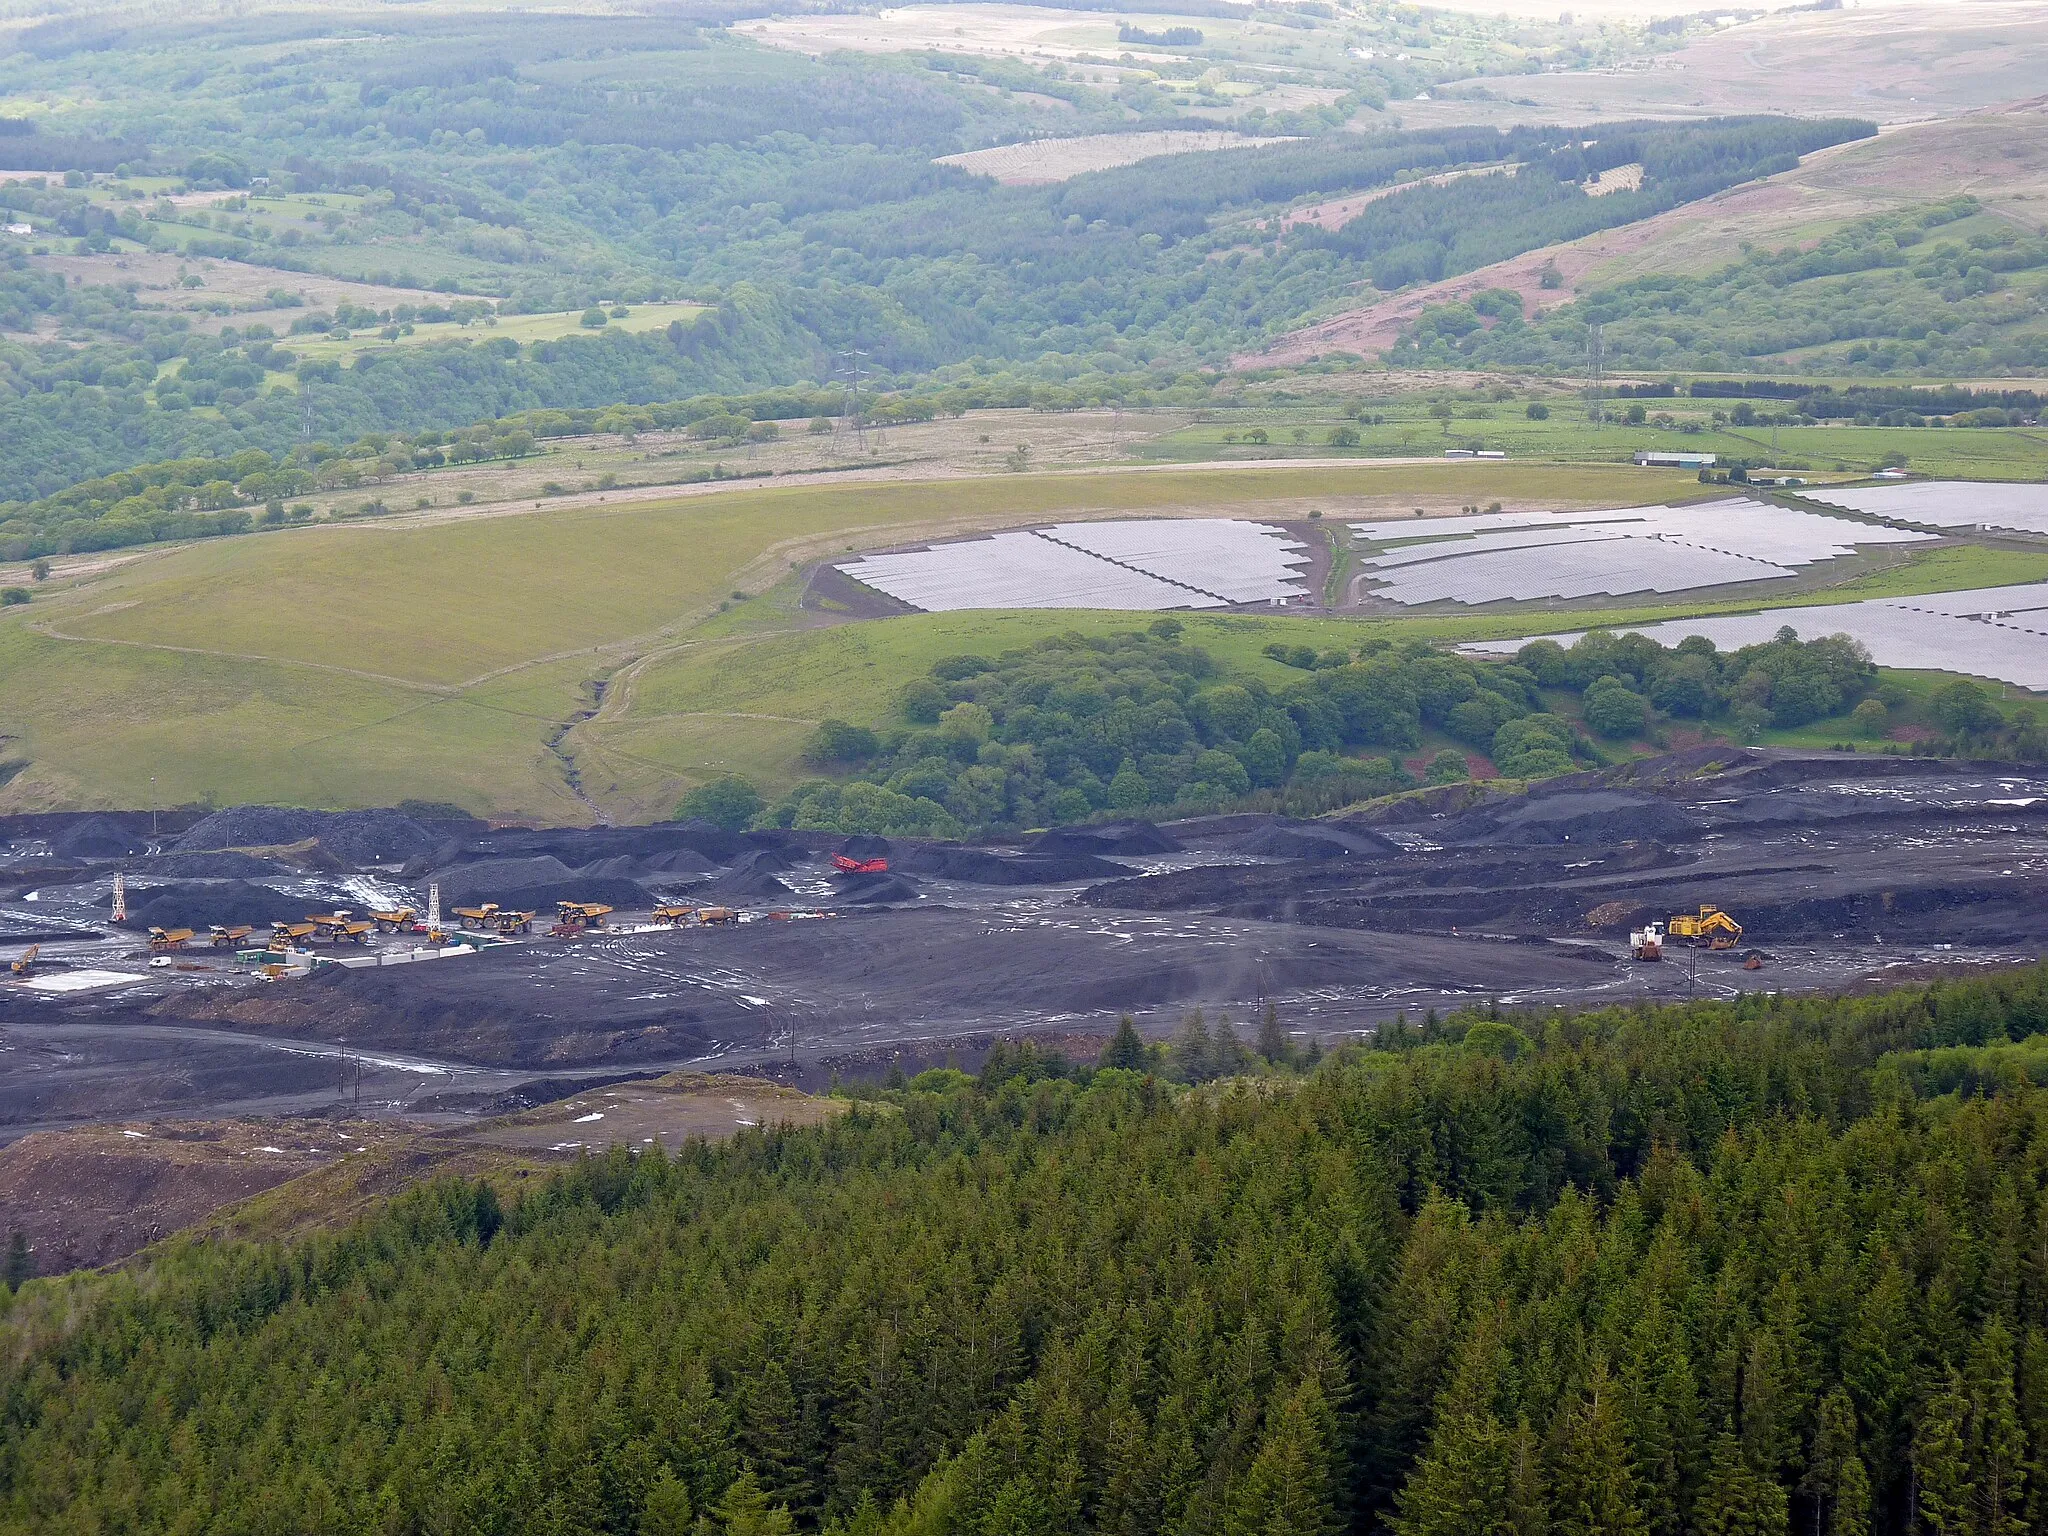 Photo showing: Open cast coal mine above Cwmgwrach, in the Neath Valley, South Wales. For most of the 19th and 20th centuries these coal seems were mined through underground tunnels. Now the only coal being extracted is through open cast mining. Beyond the open cast are photoelectric panels, and then the slopes of the upper neath valley, leading into the Brecon Beacons.